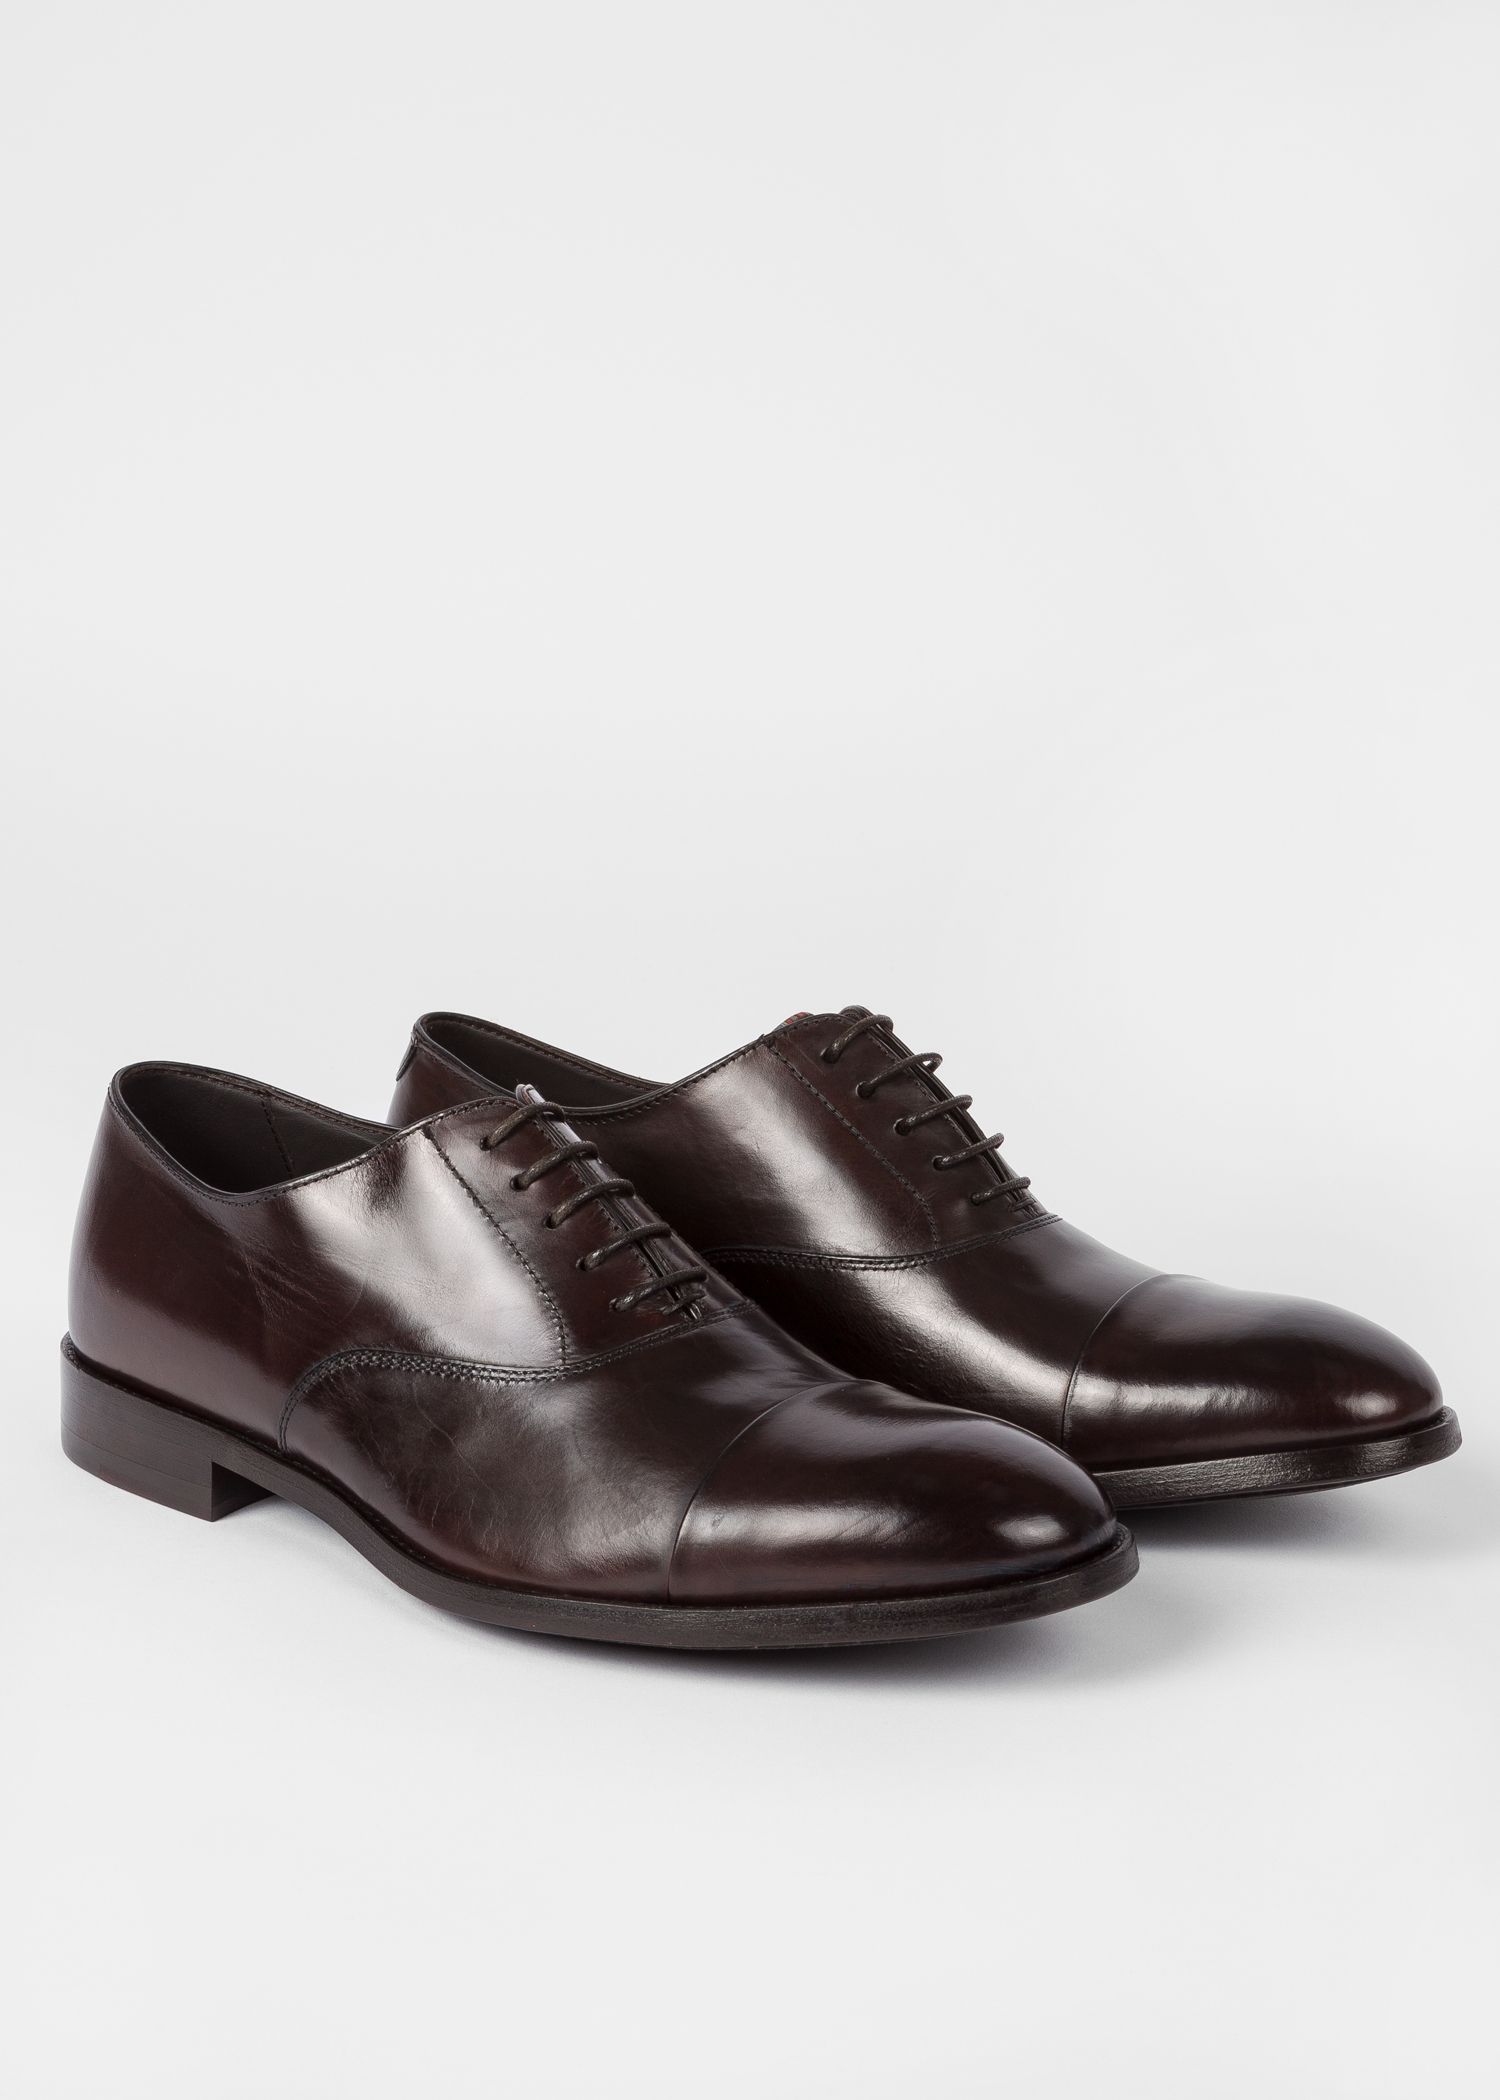 Buy > black paul smith shoes > in stock